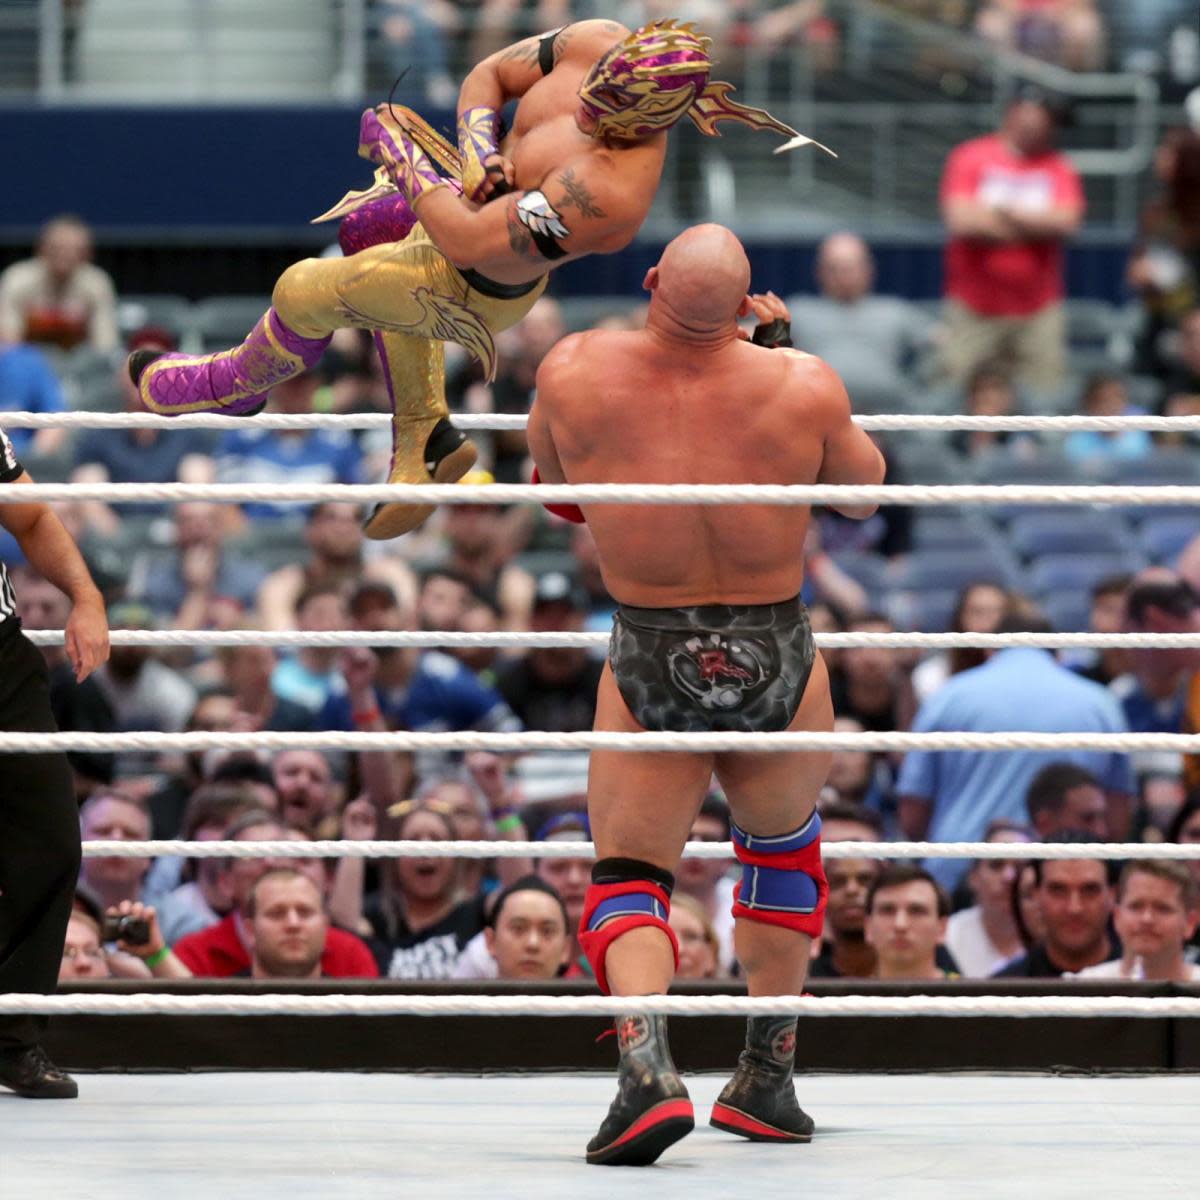 Kalisto and Ryback wrestled in front of numerous empty seats on the Wrestlemania kick-off show